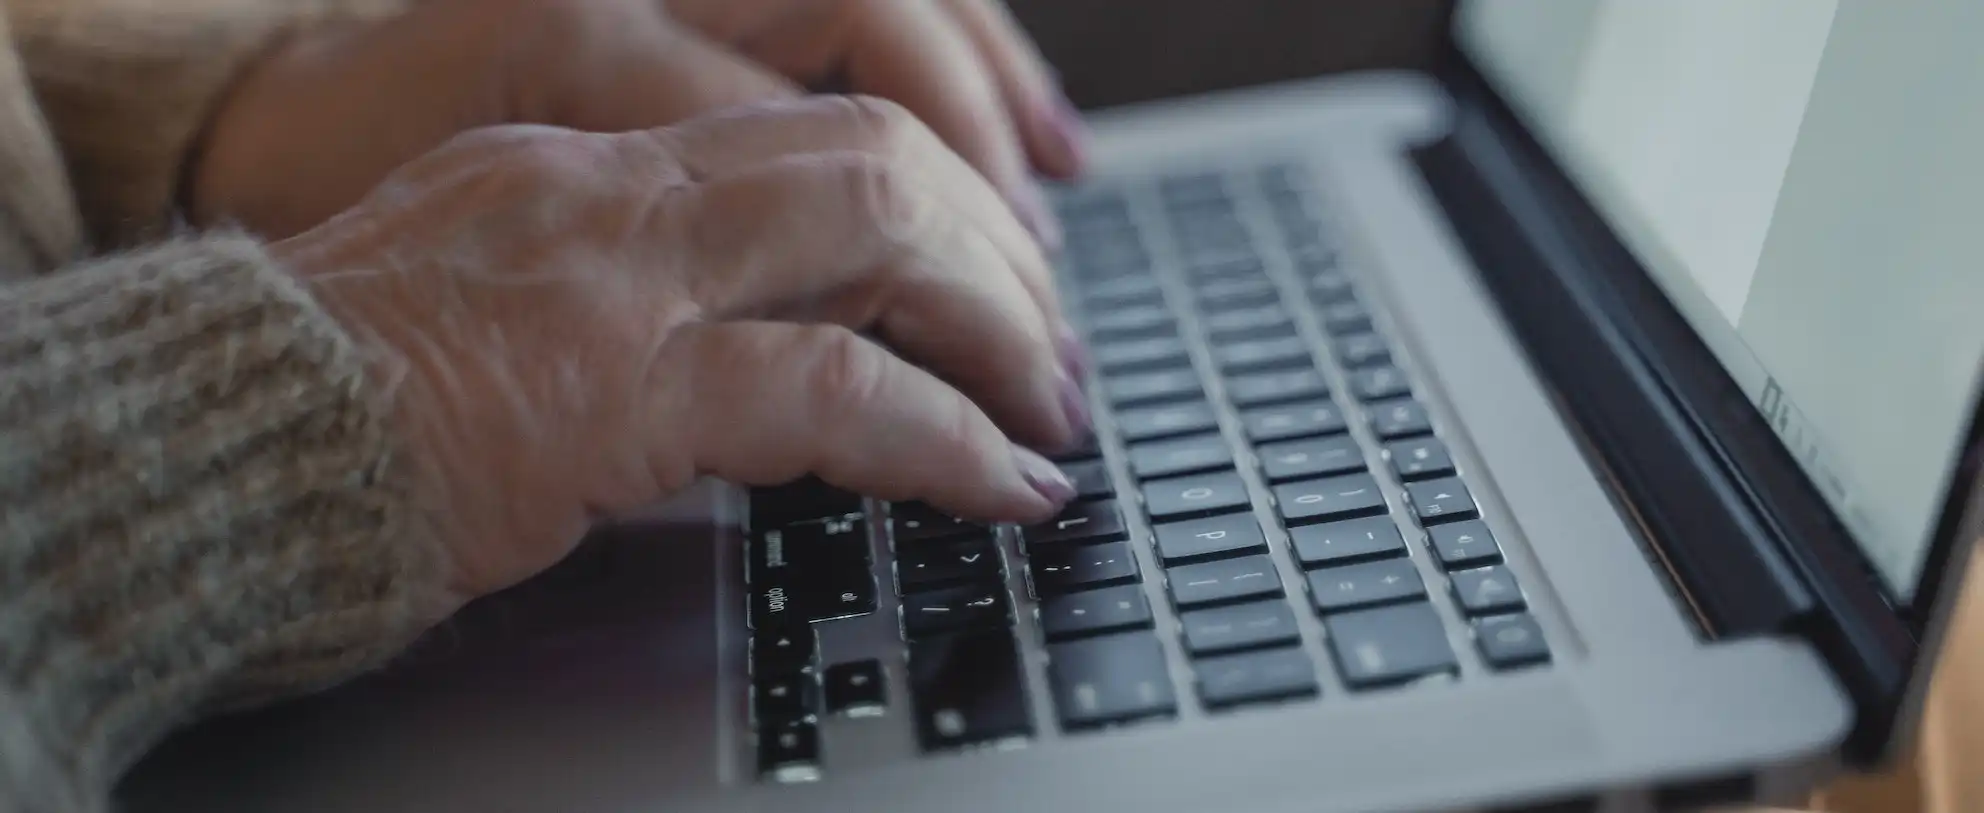 Photograph of Old People Hand Typing on Macbook